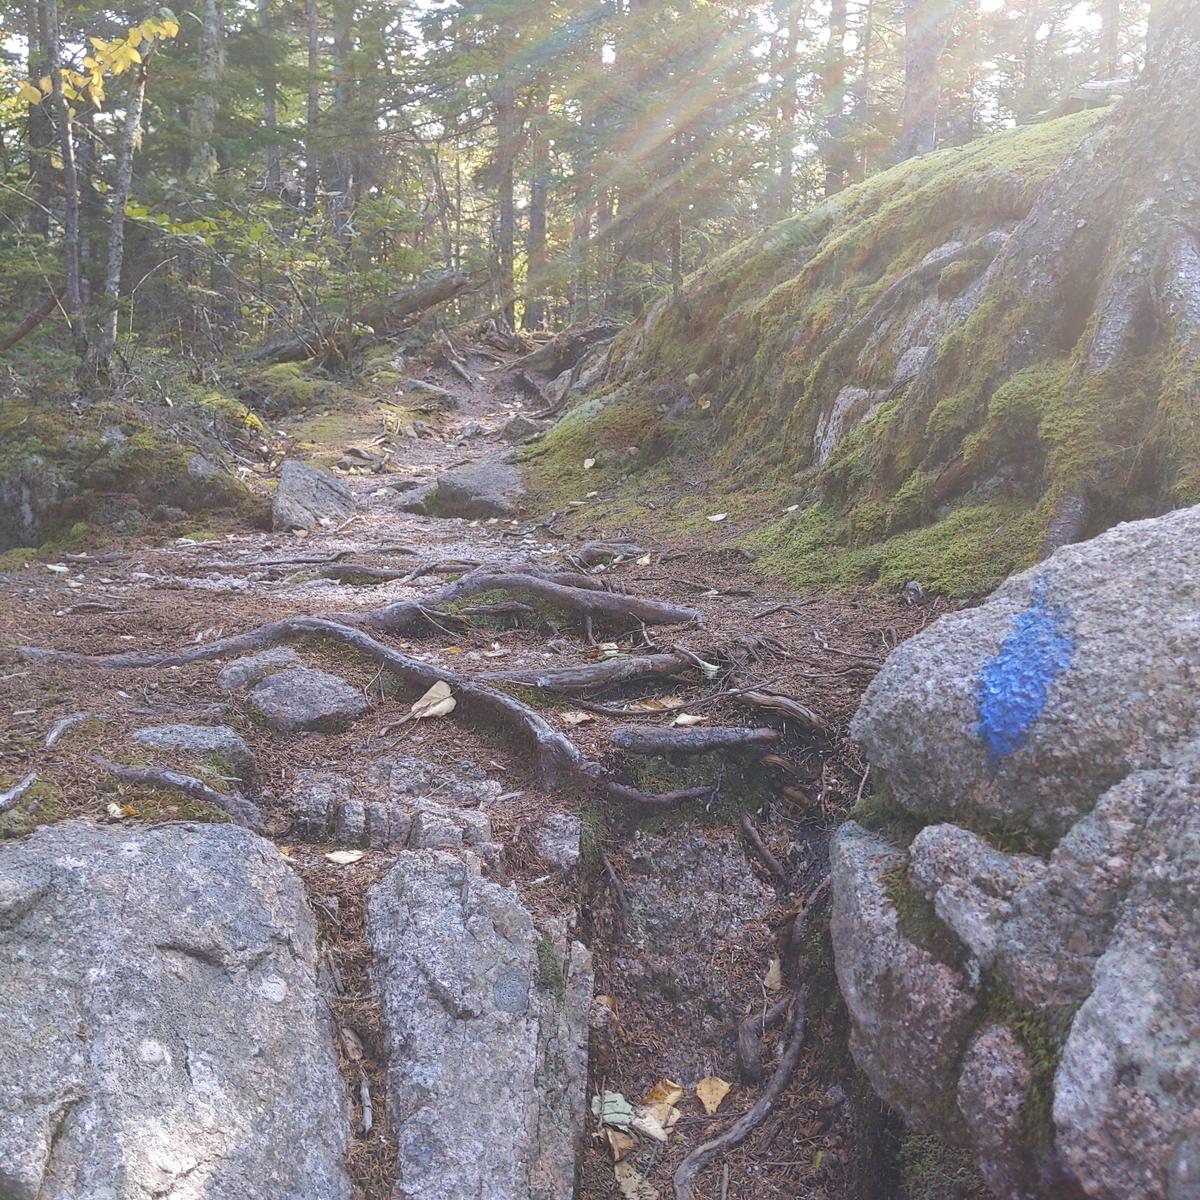 A rocky/rooty section of trail